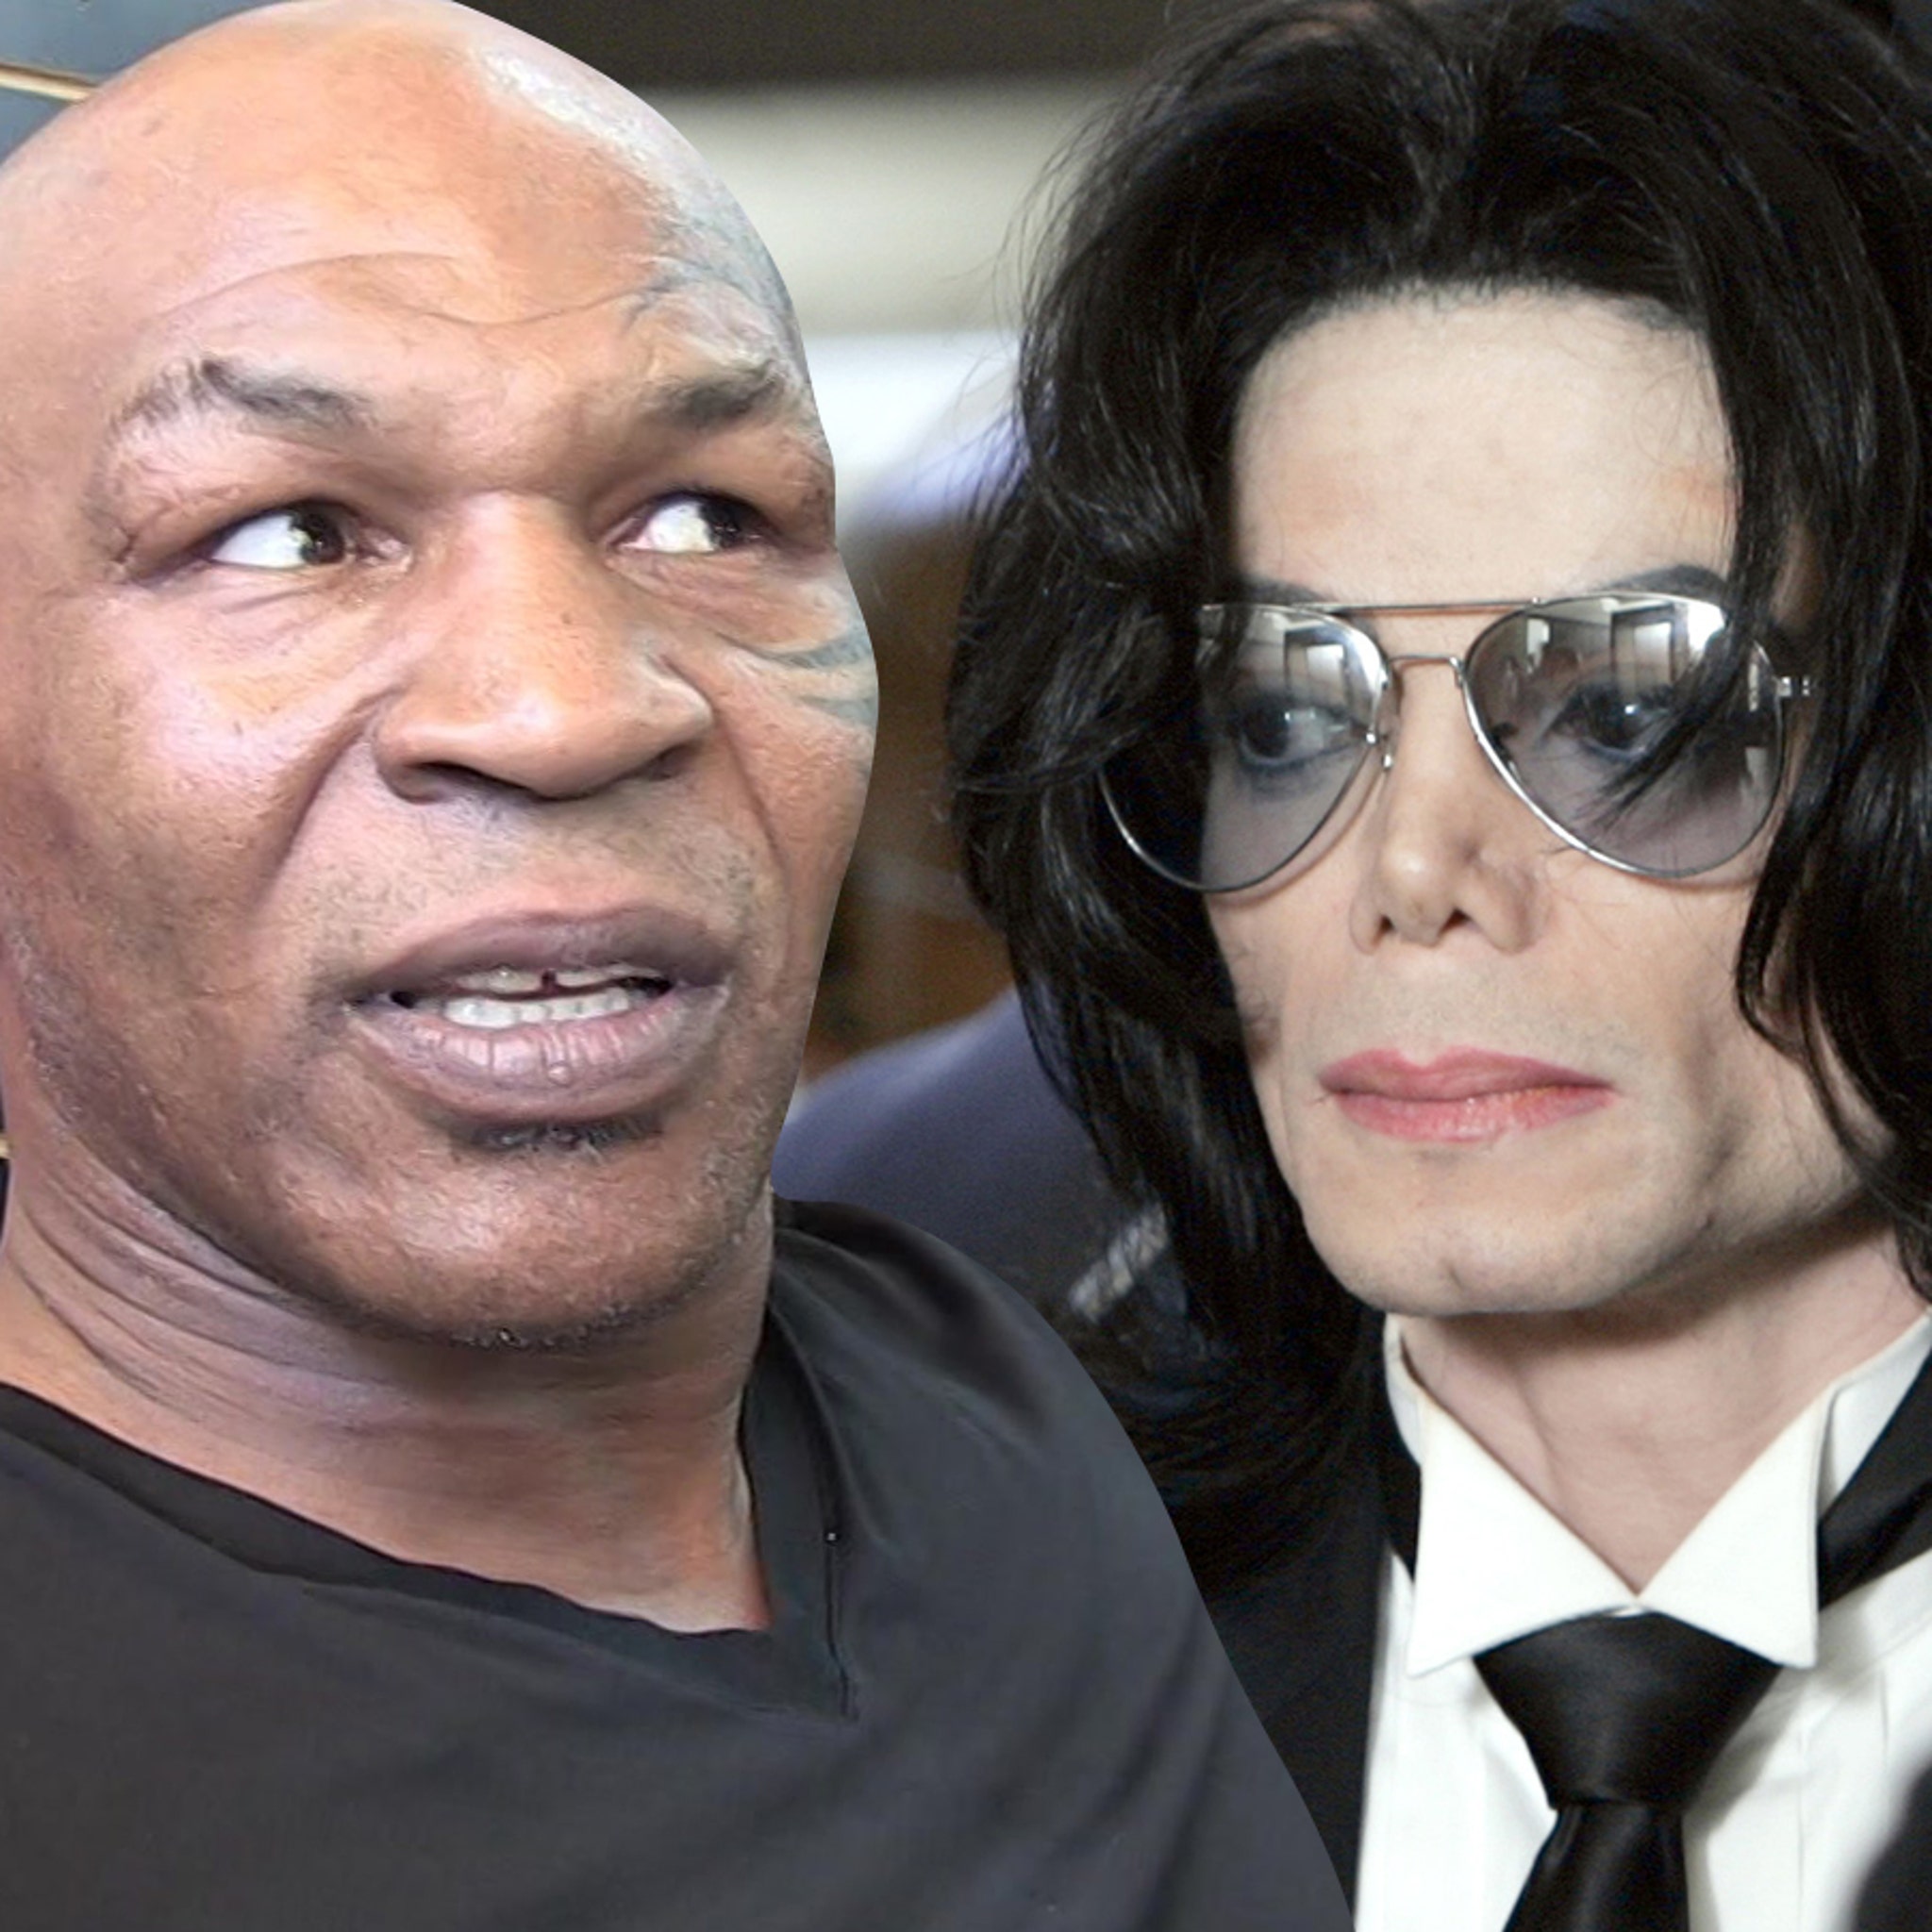 Mike Tyson Says Michael Jackson Was a 'Player,' Feeble Demeanor Was an Act